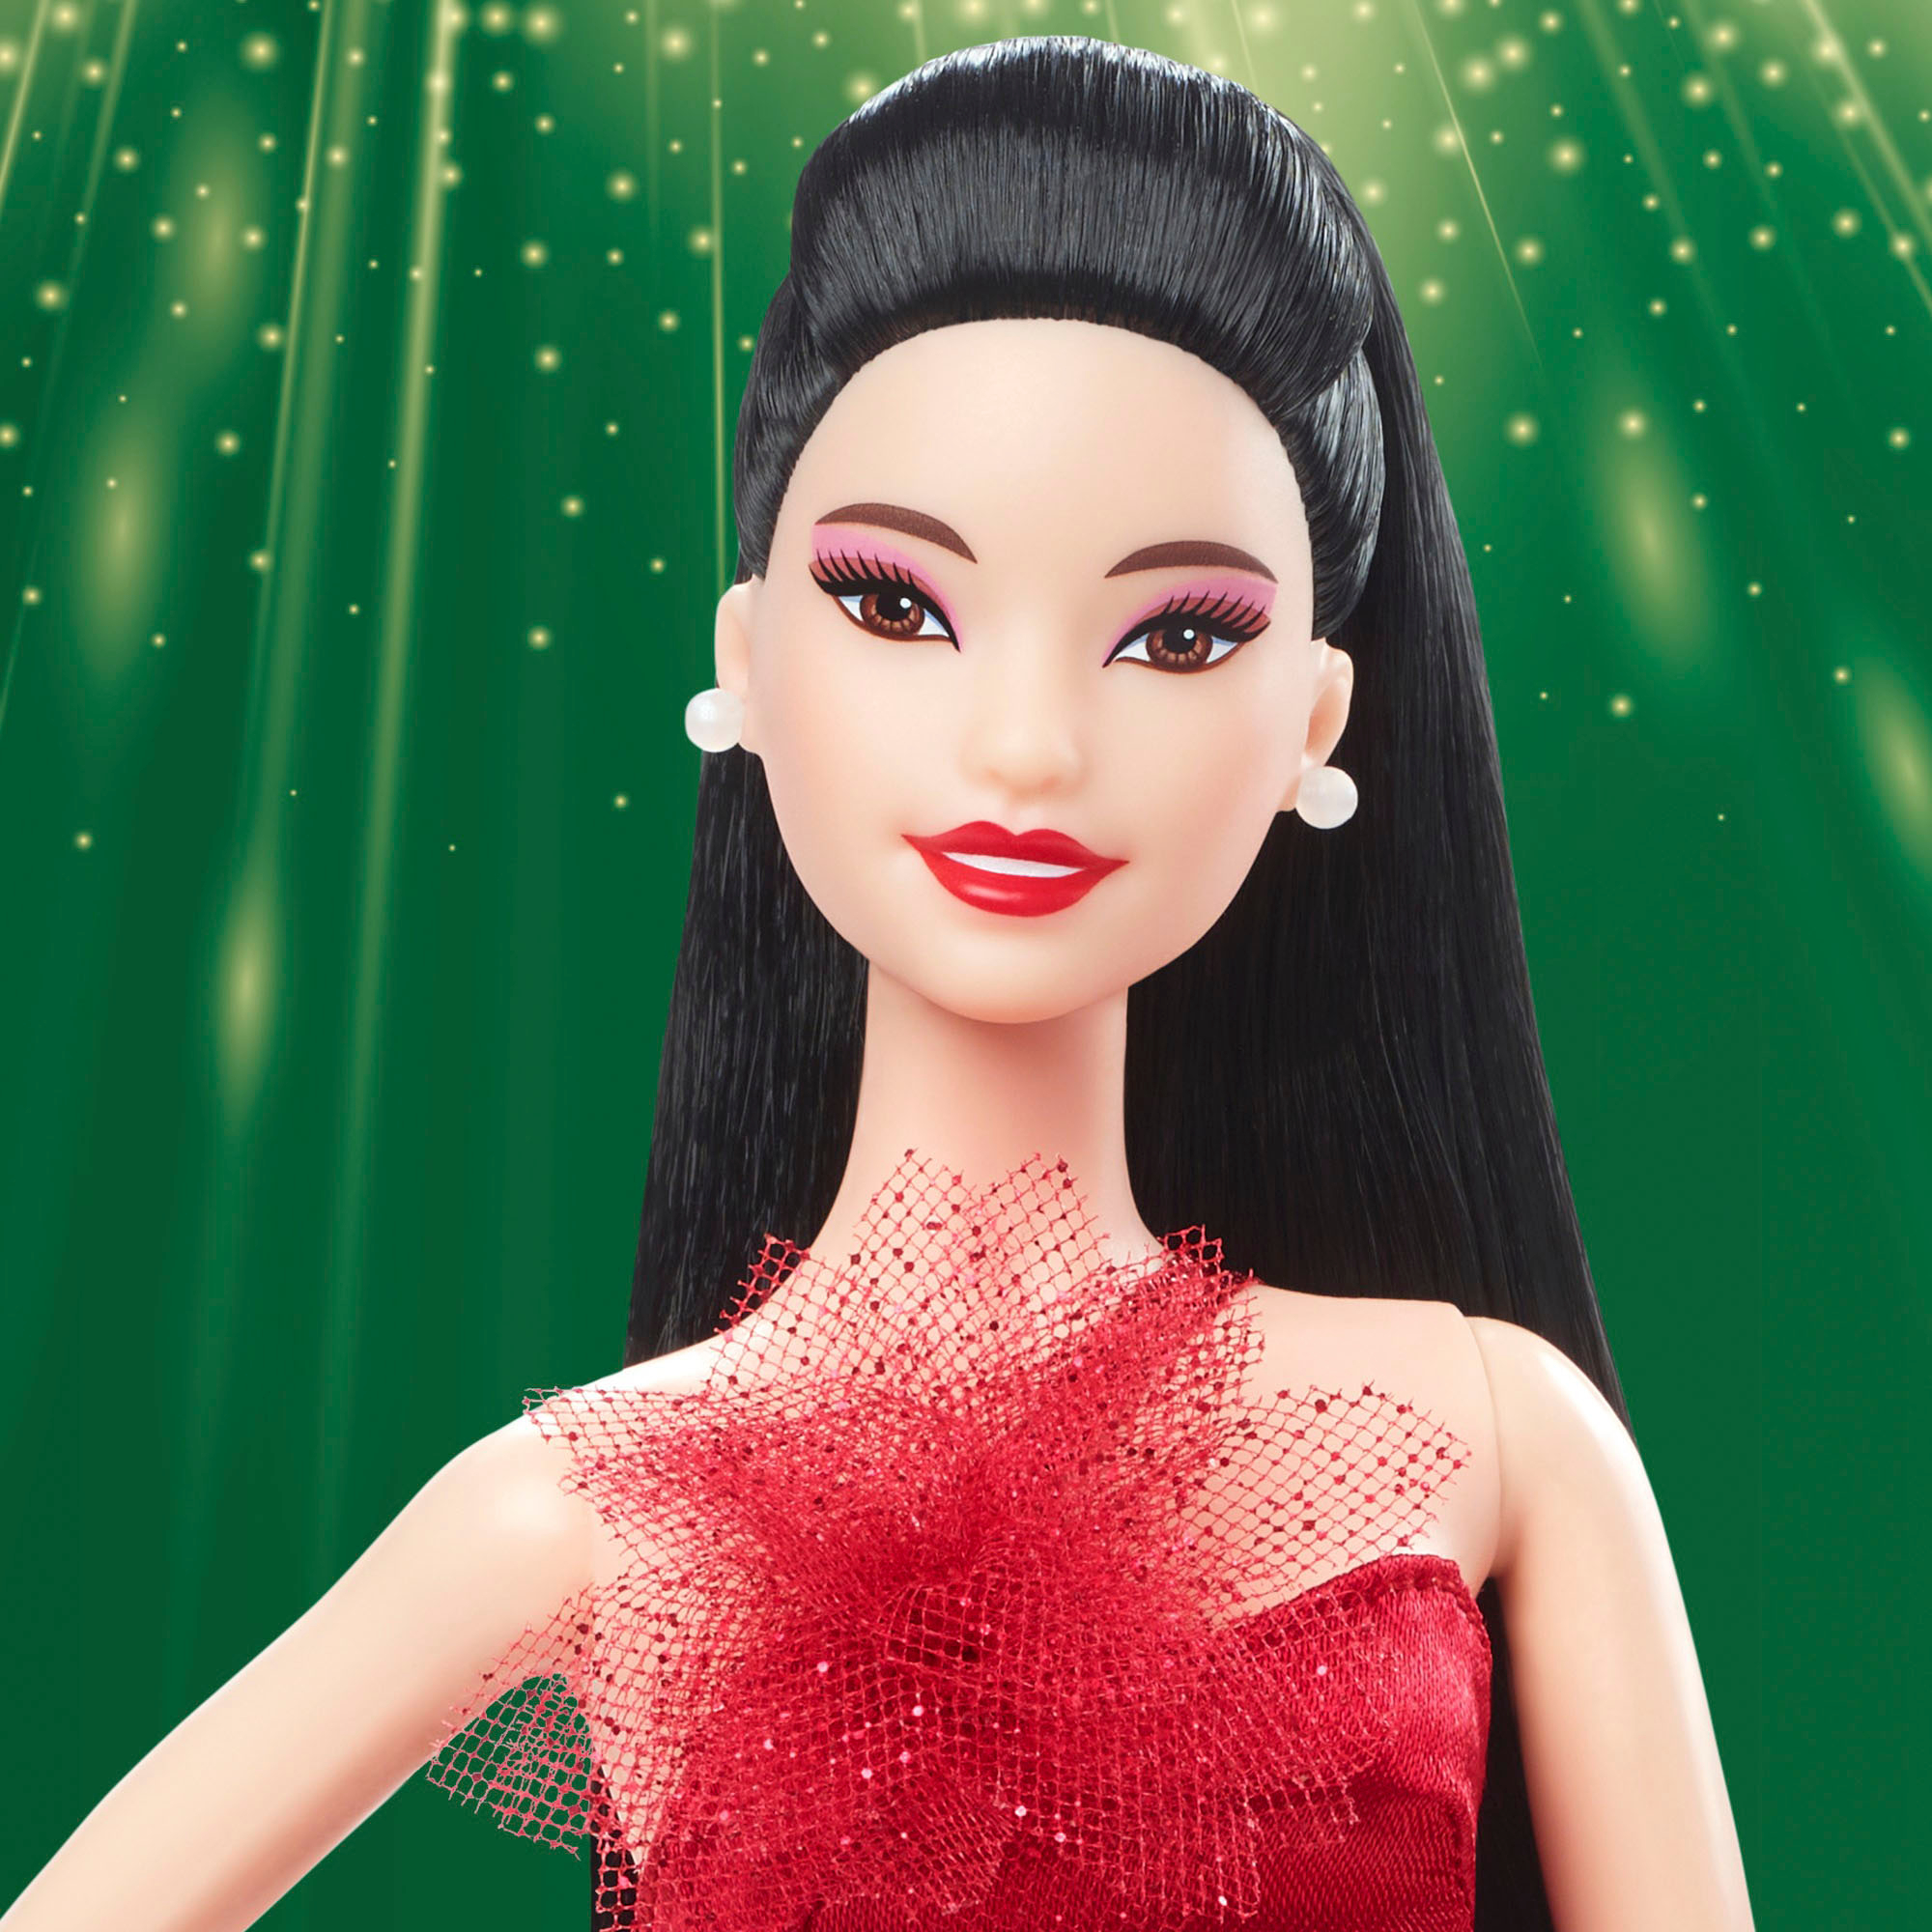 SALE! SALE! BARBIE Signature 2022 Holiday Doll Asian Dark Hair Red  Collectible